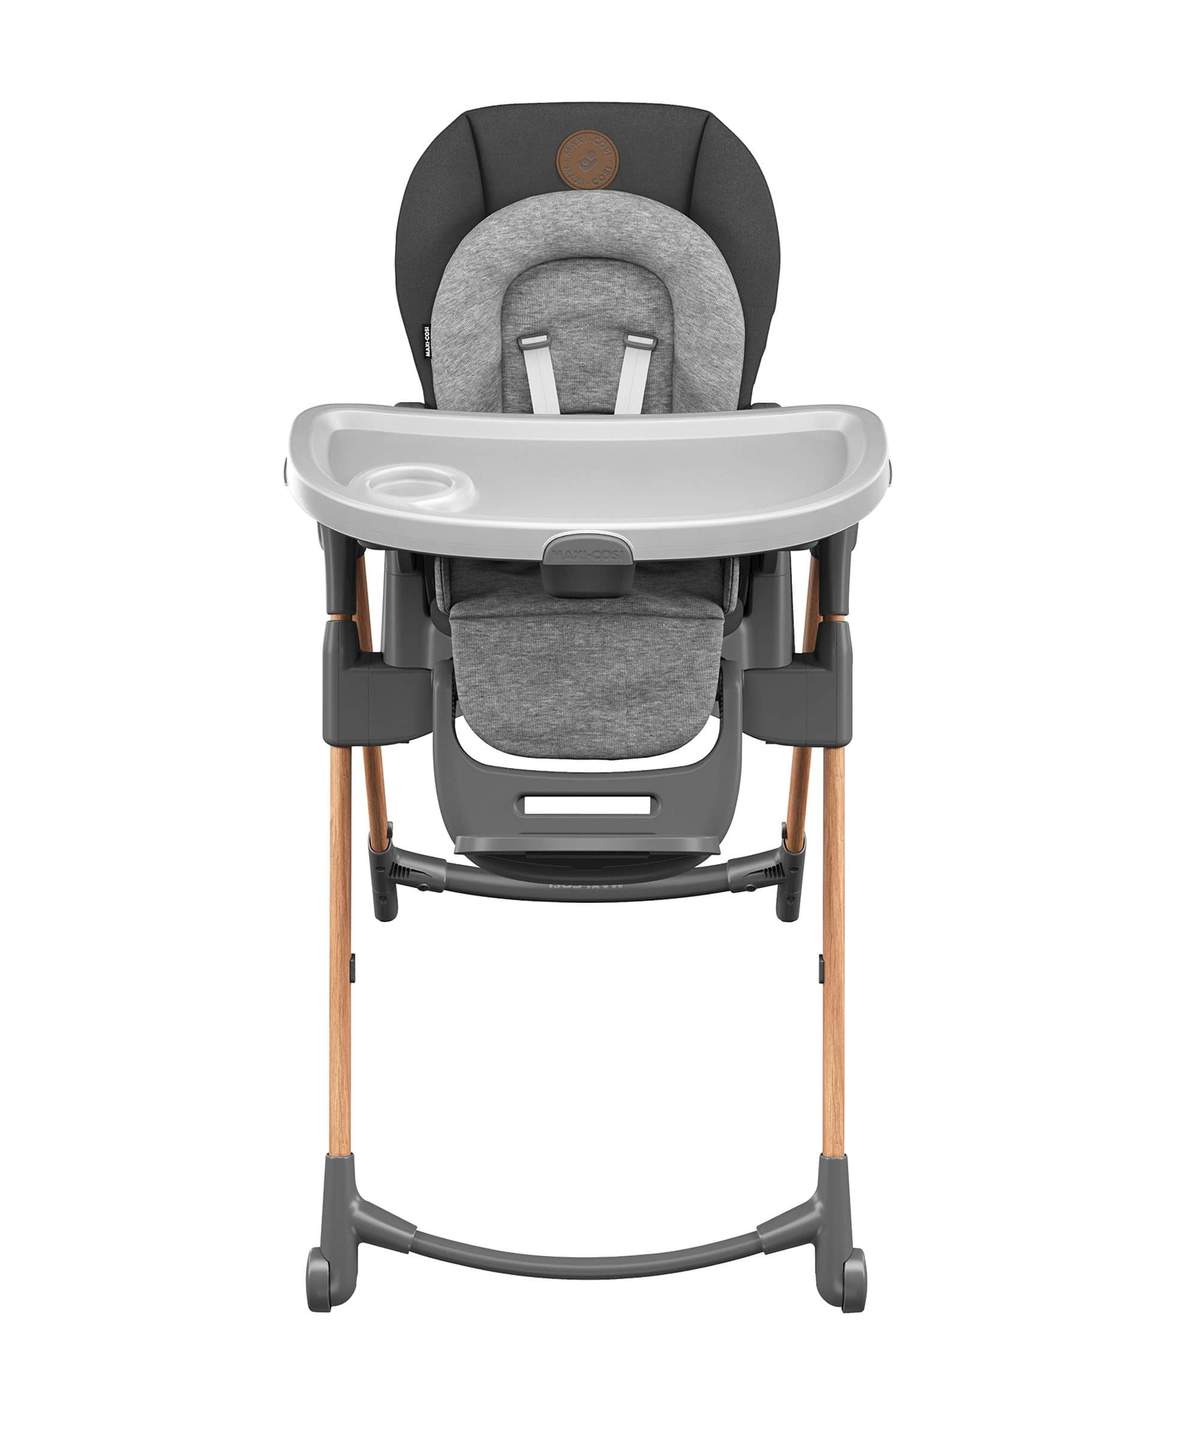 Maxi Cosi High Chair Minla (Birth to 36 Months) Essential Graphite-Distressed